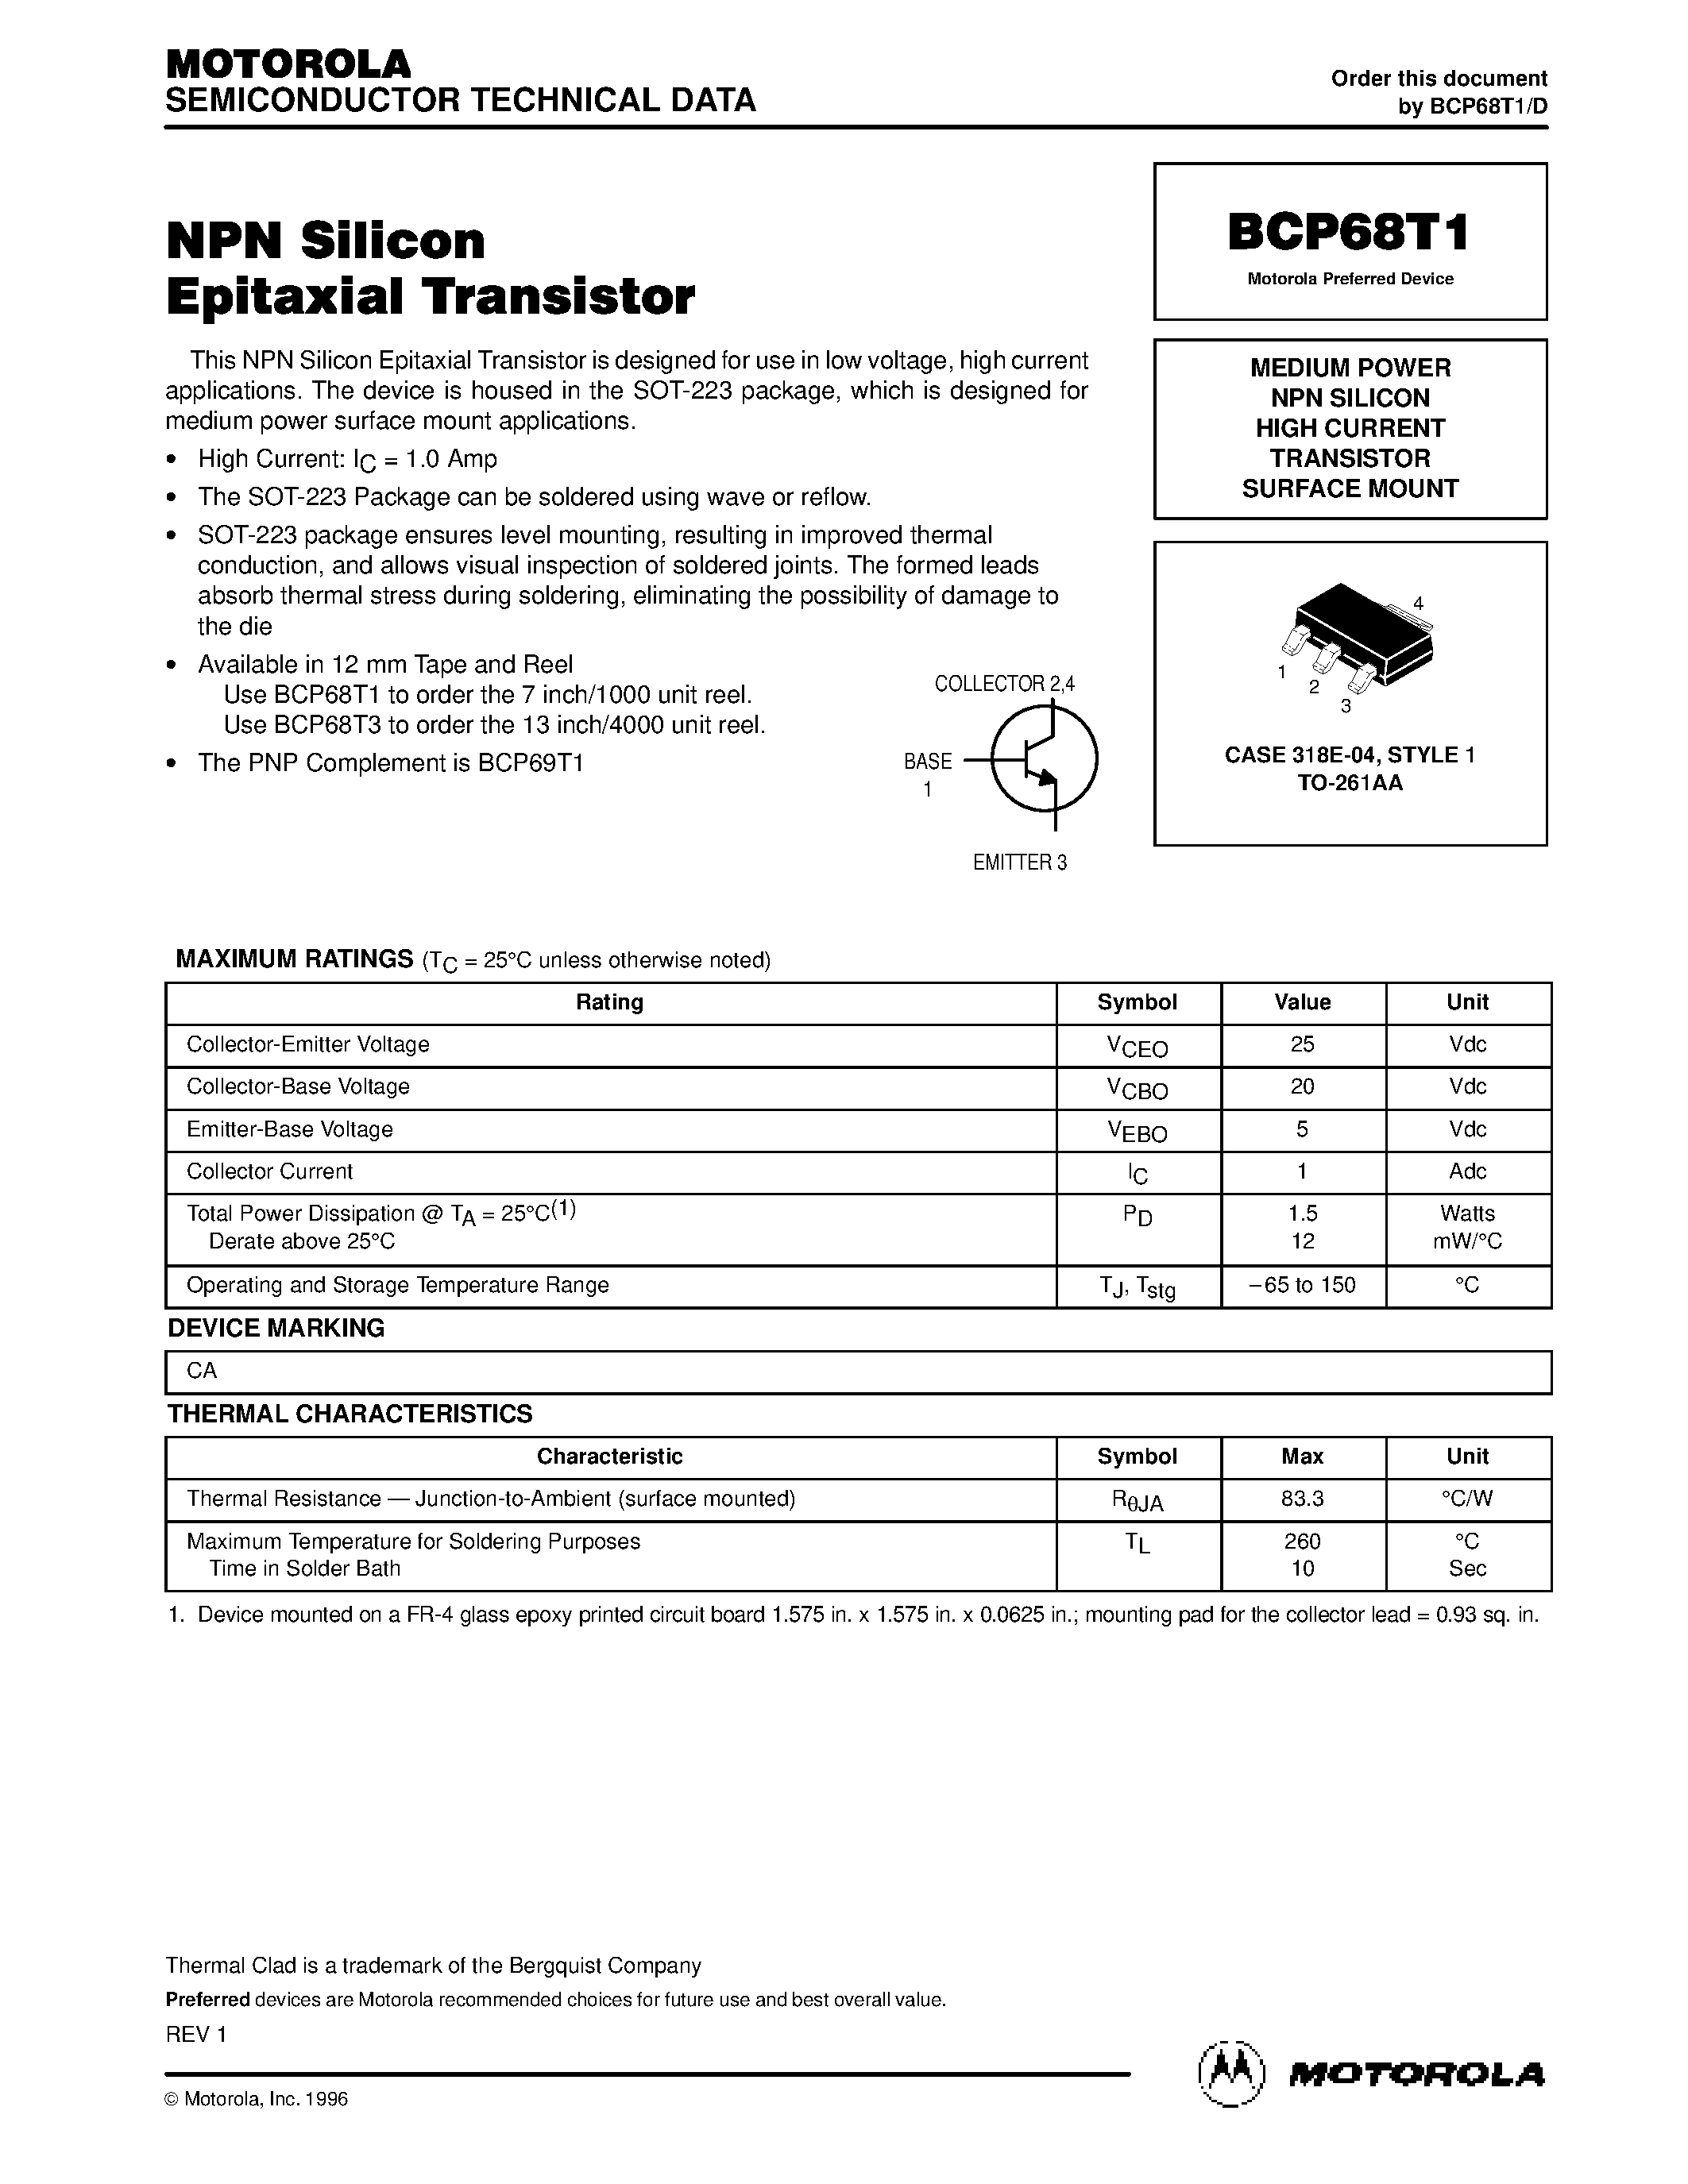 Datasheet BCP68T1 - MEDIUM POWER NPN SILICON HIGH CURRENT TRANSISTOR SURFACE MOUNT page 1